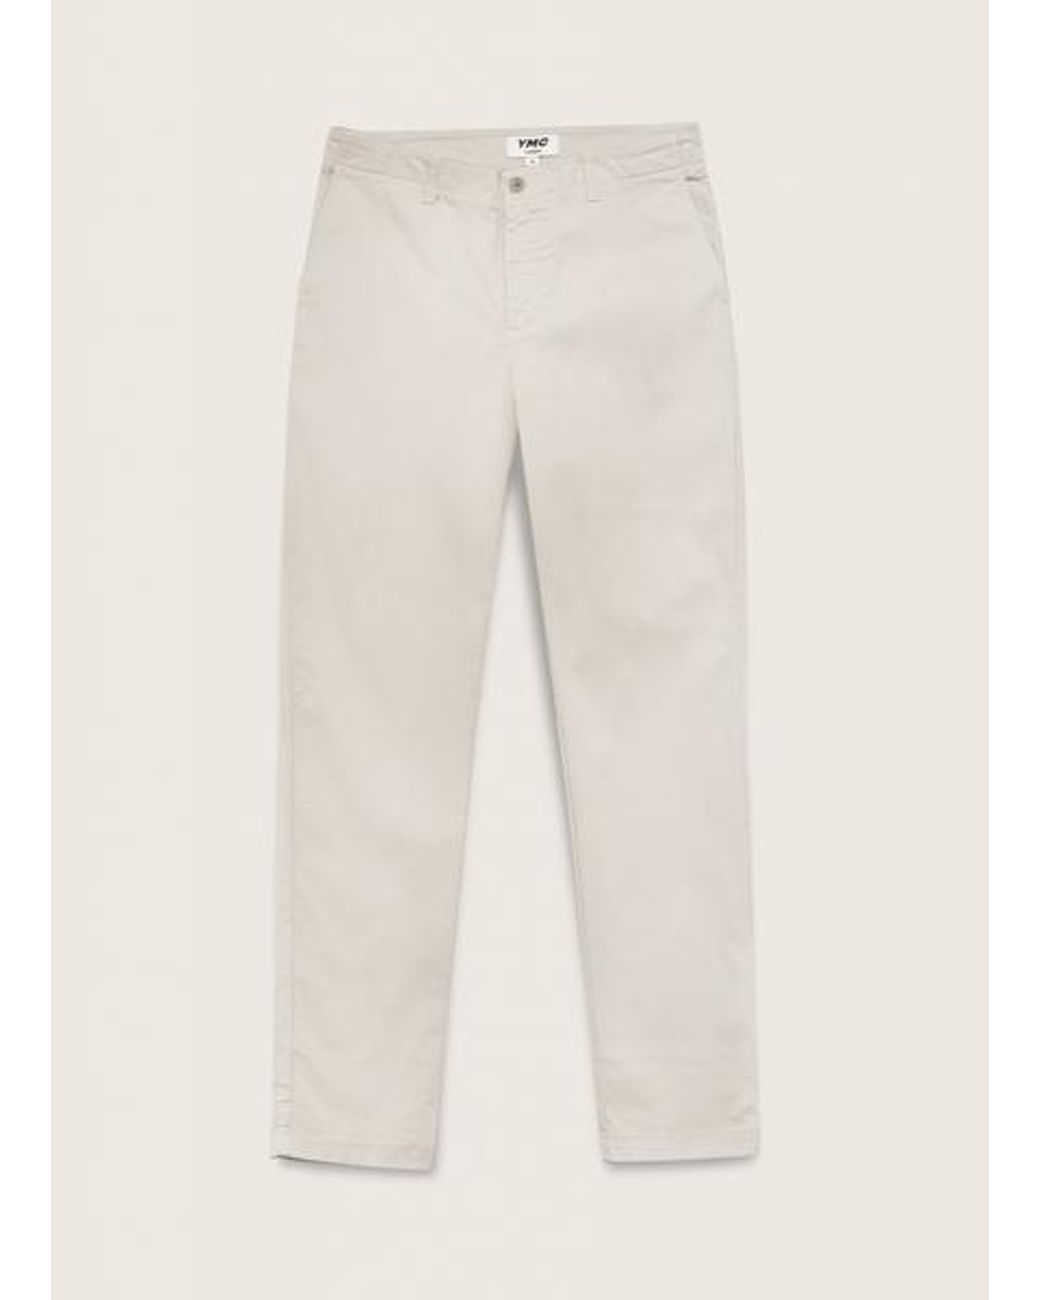 YMC Deja Vu Cotton Twill Trousers Stone in Natural for Men - Lyst